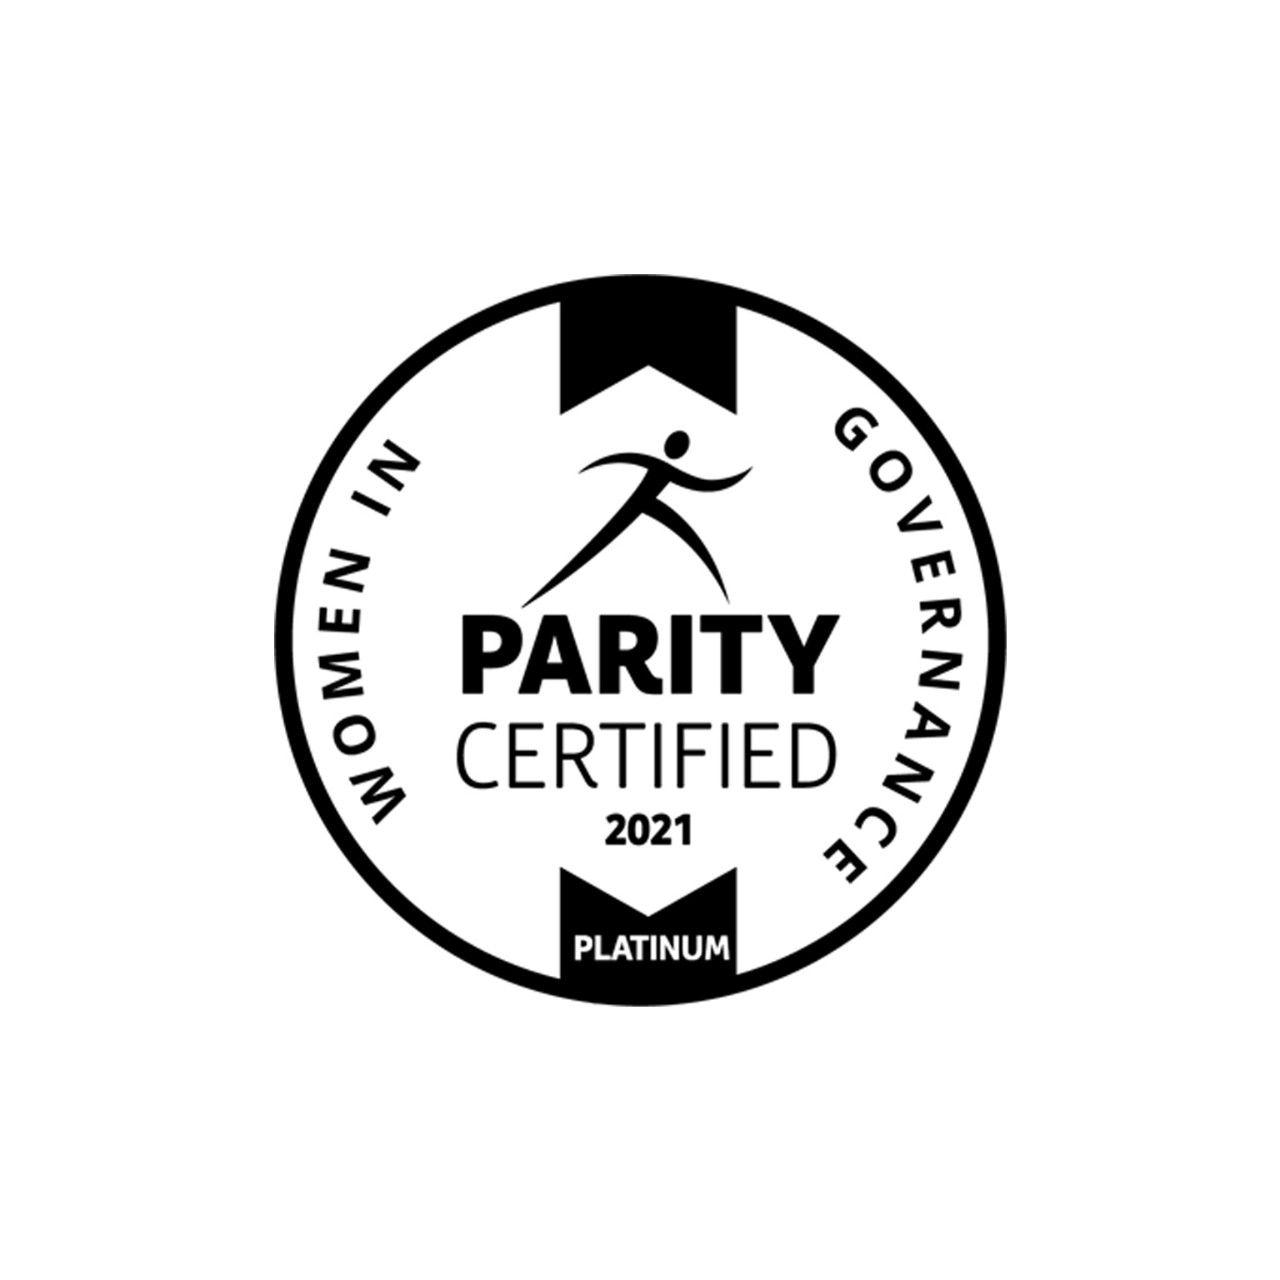 The Parity Certification